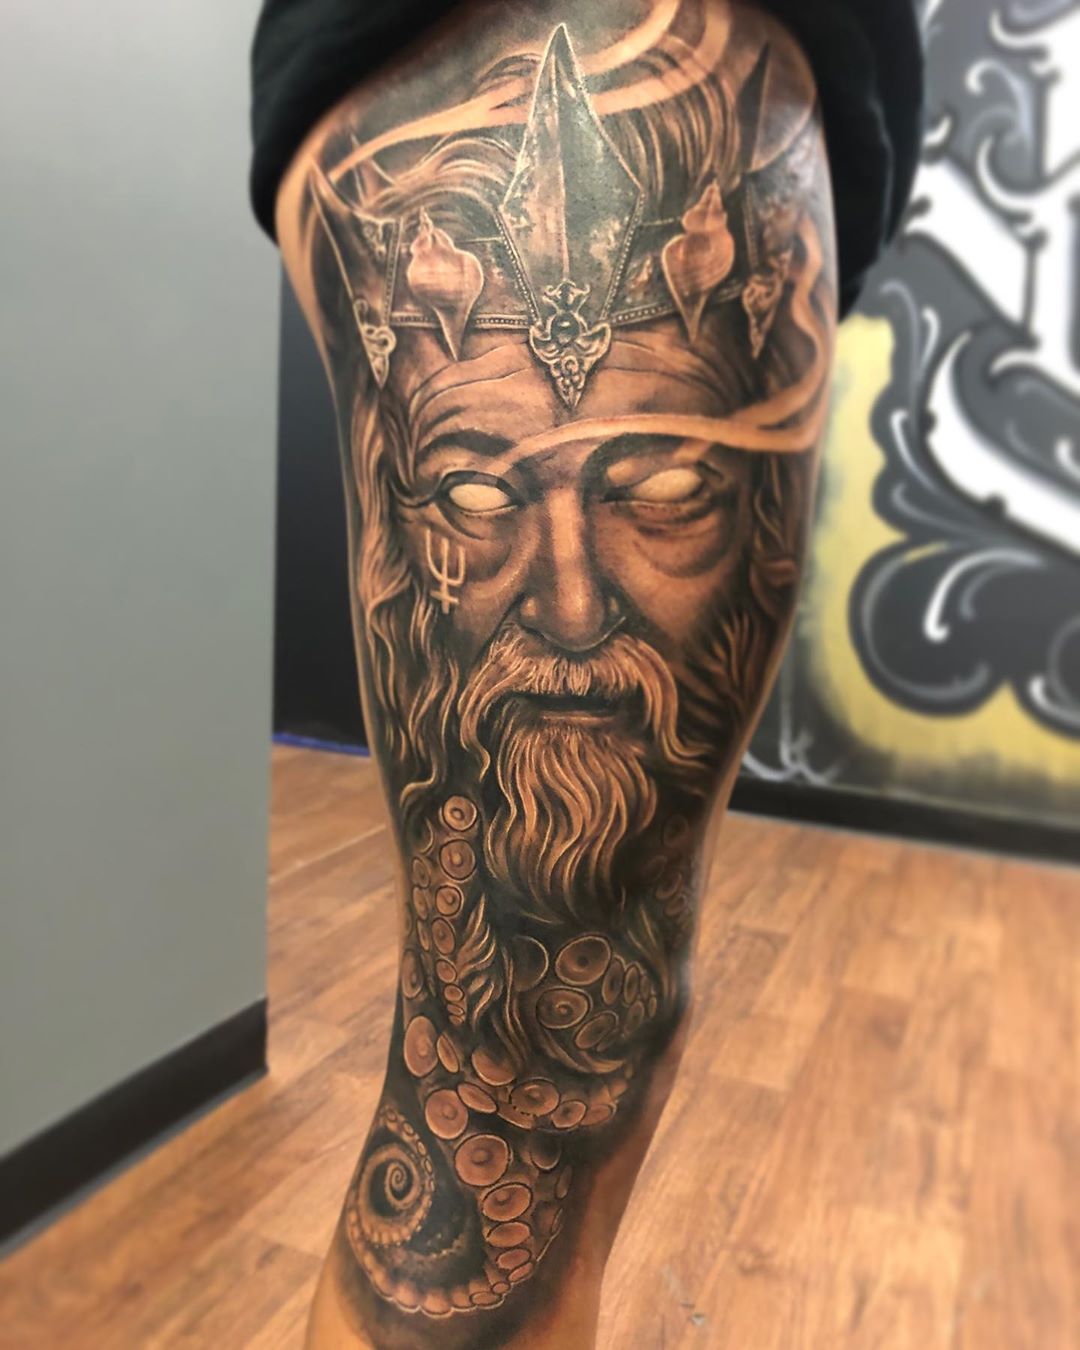 Michael Moore Tattoos  Super excited about this finished Greek mythology  leg sleeve on pumpkinqueen  Thank you so much for all of your patience  with me and trusting me to do